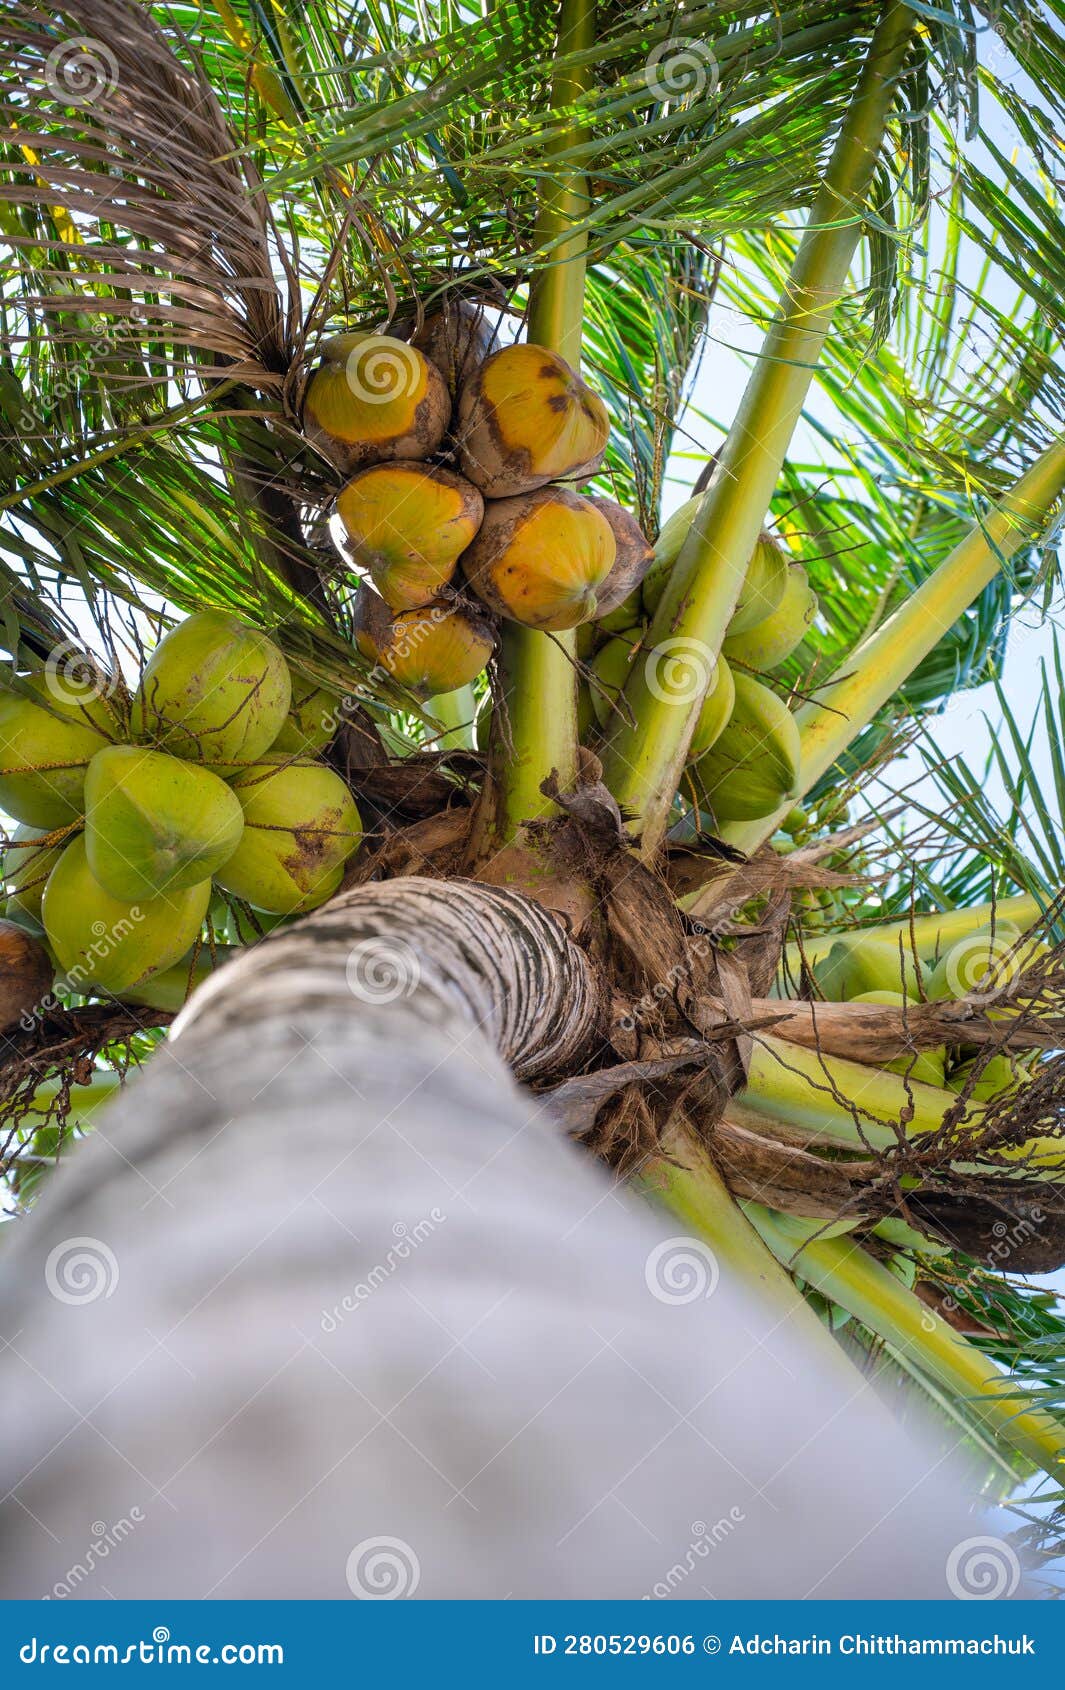 Fresh Green Coconut on the Coconut Tree, Coconut Cluster on Coconut ...